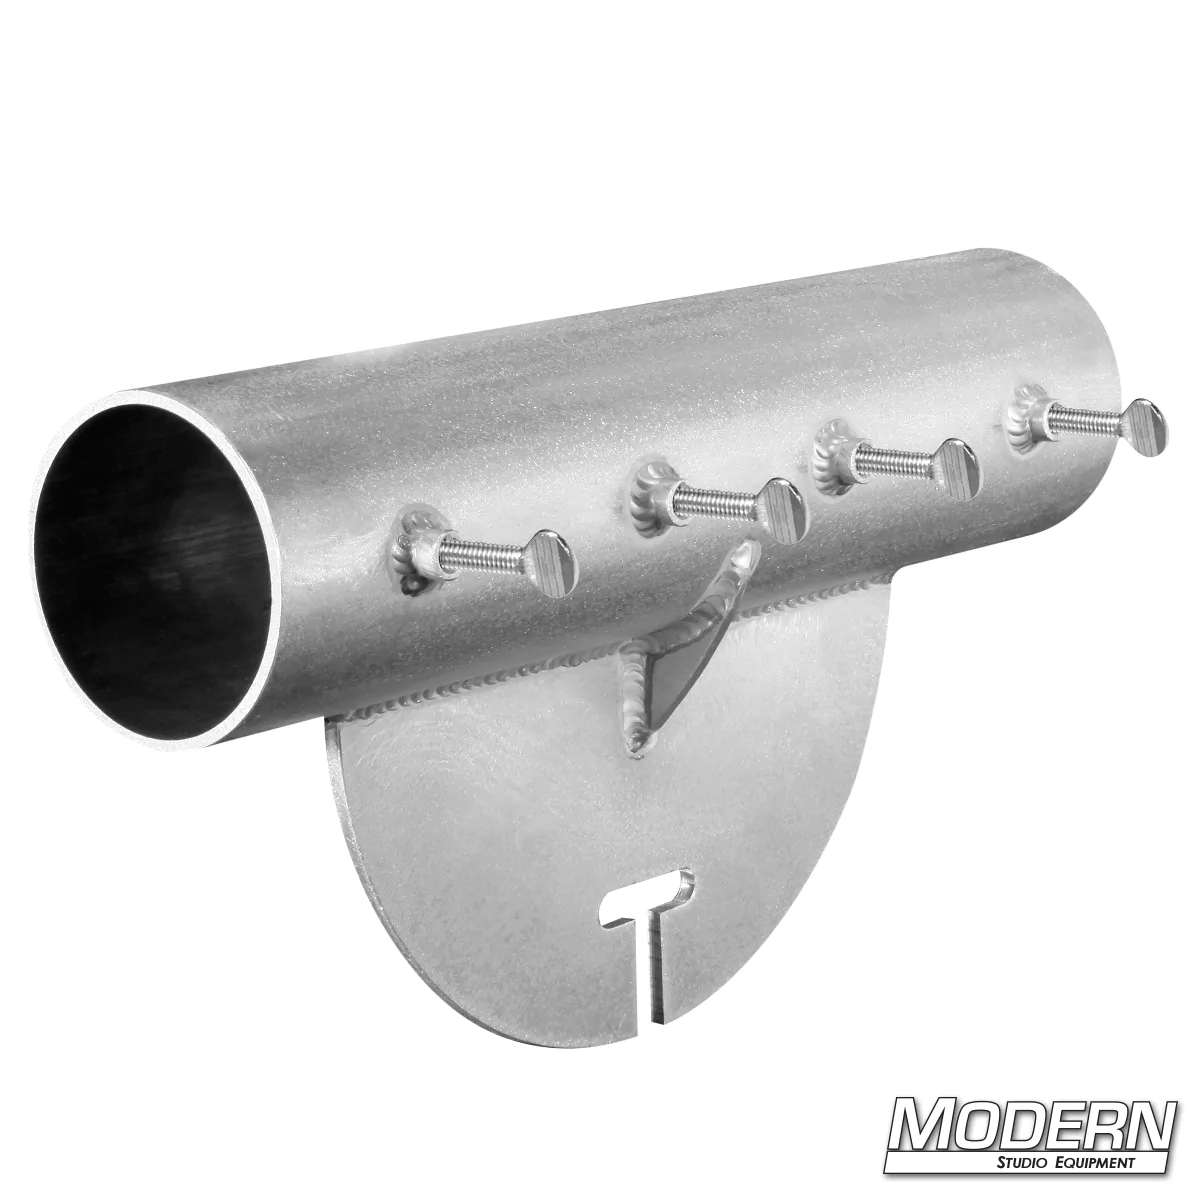 Ear for 4-inch Irrigation Pipe